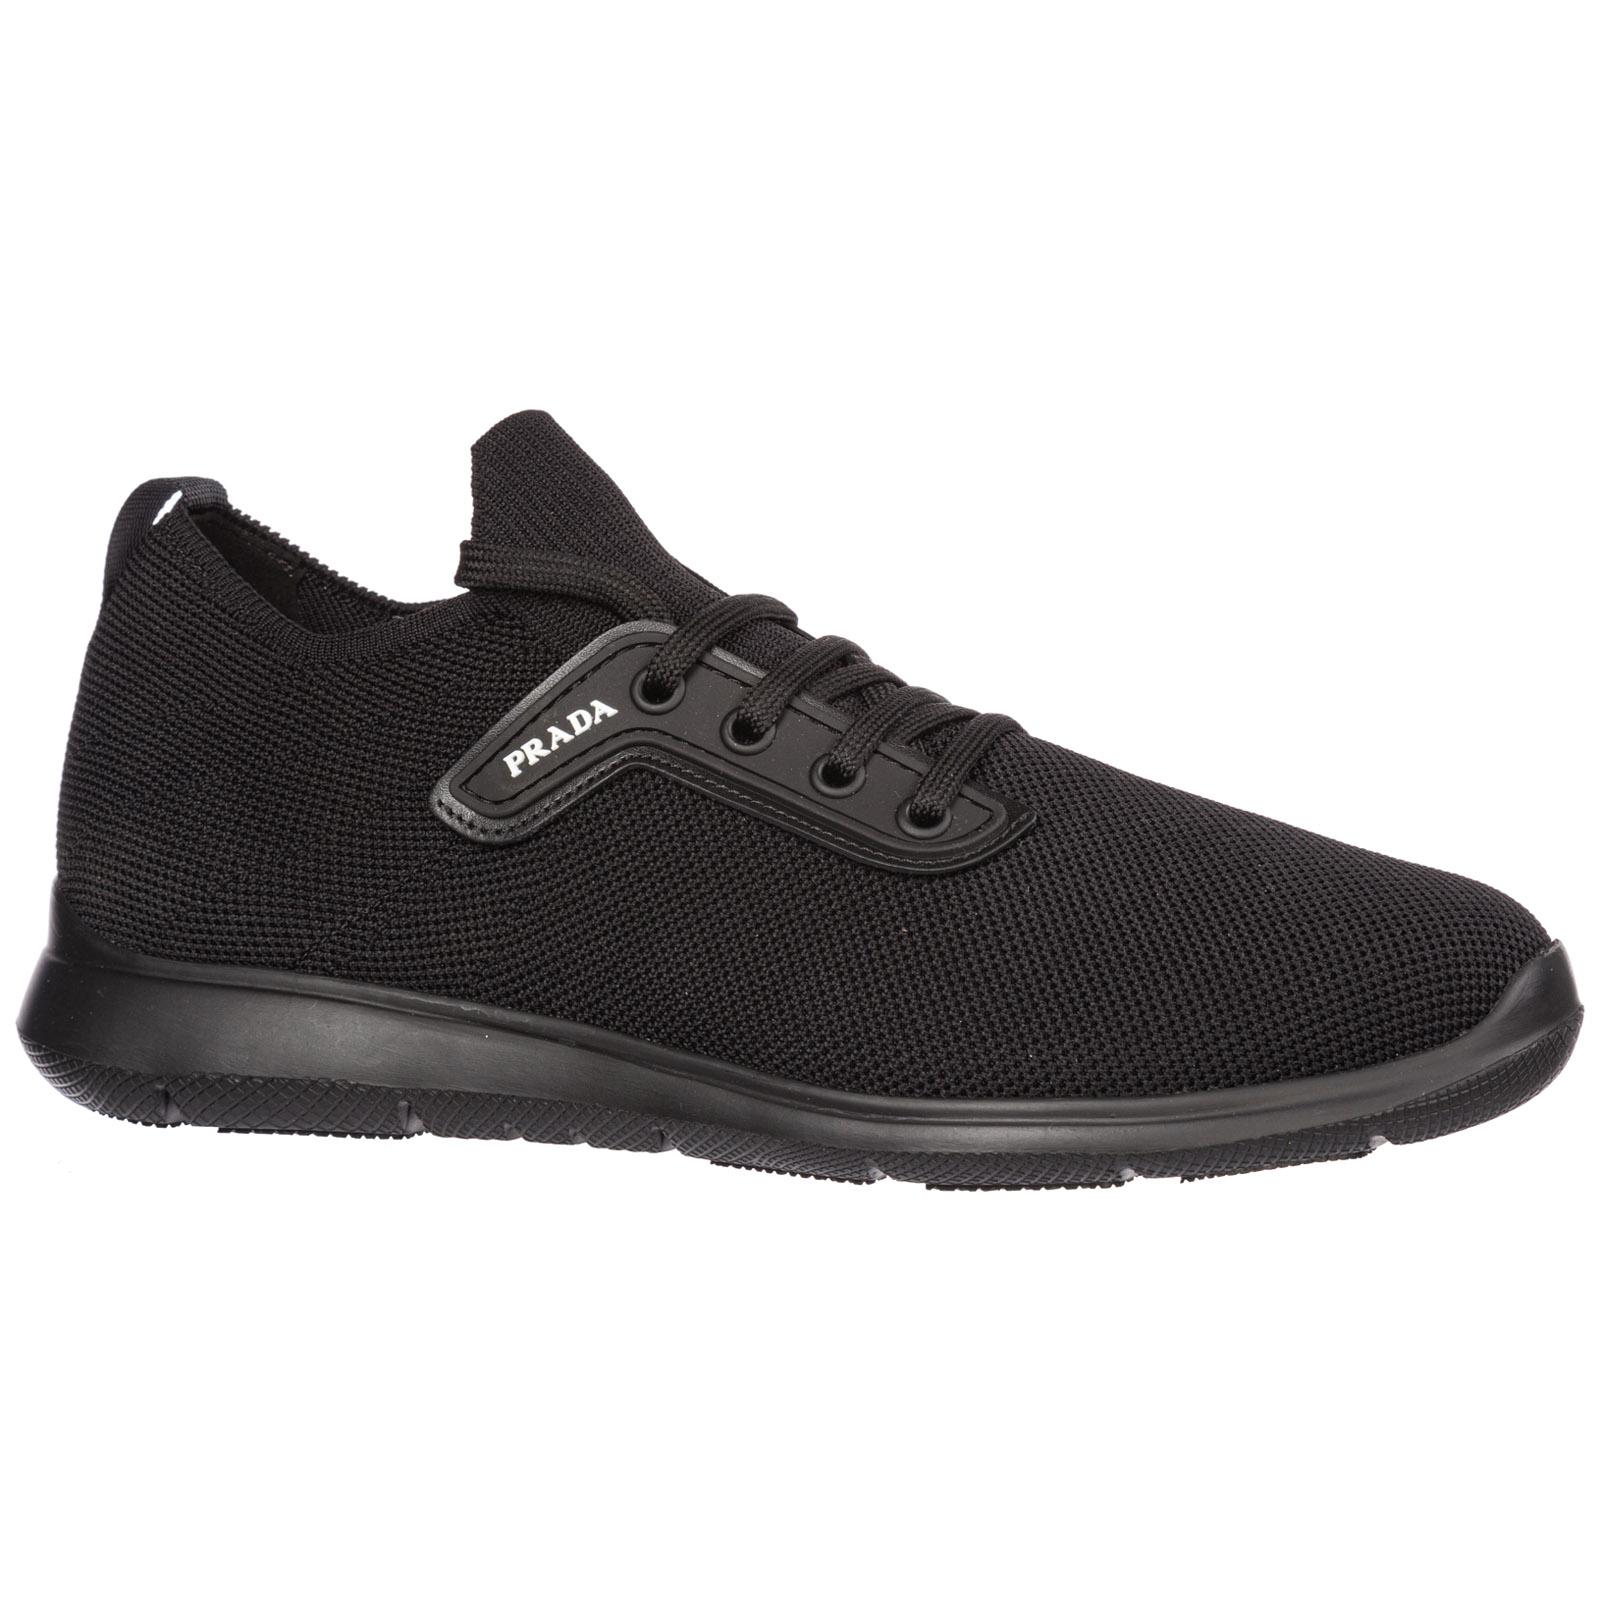 Prada Shoes Trainers Sneakers in Nero (Black) for Men - Lyst